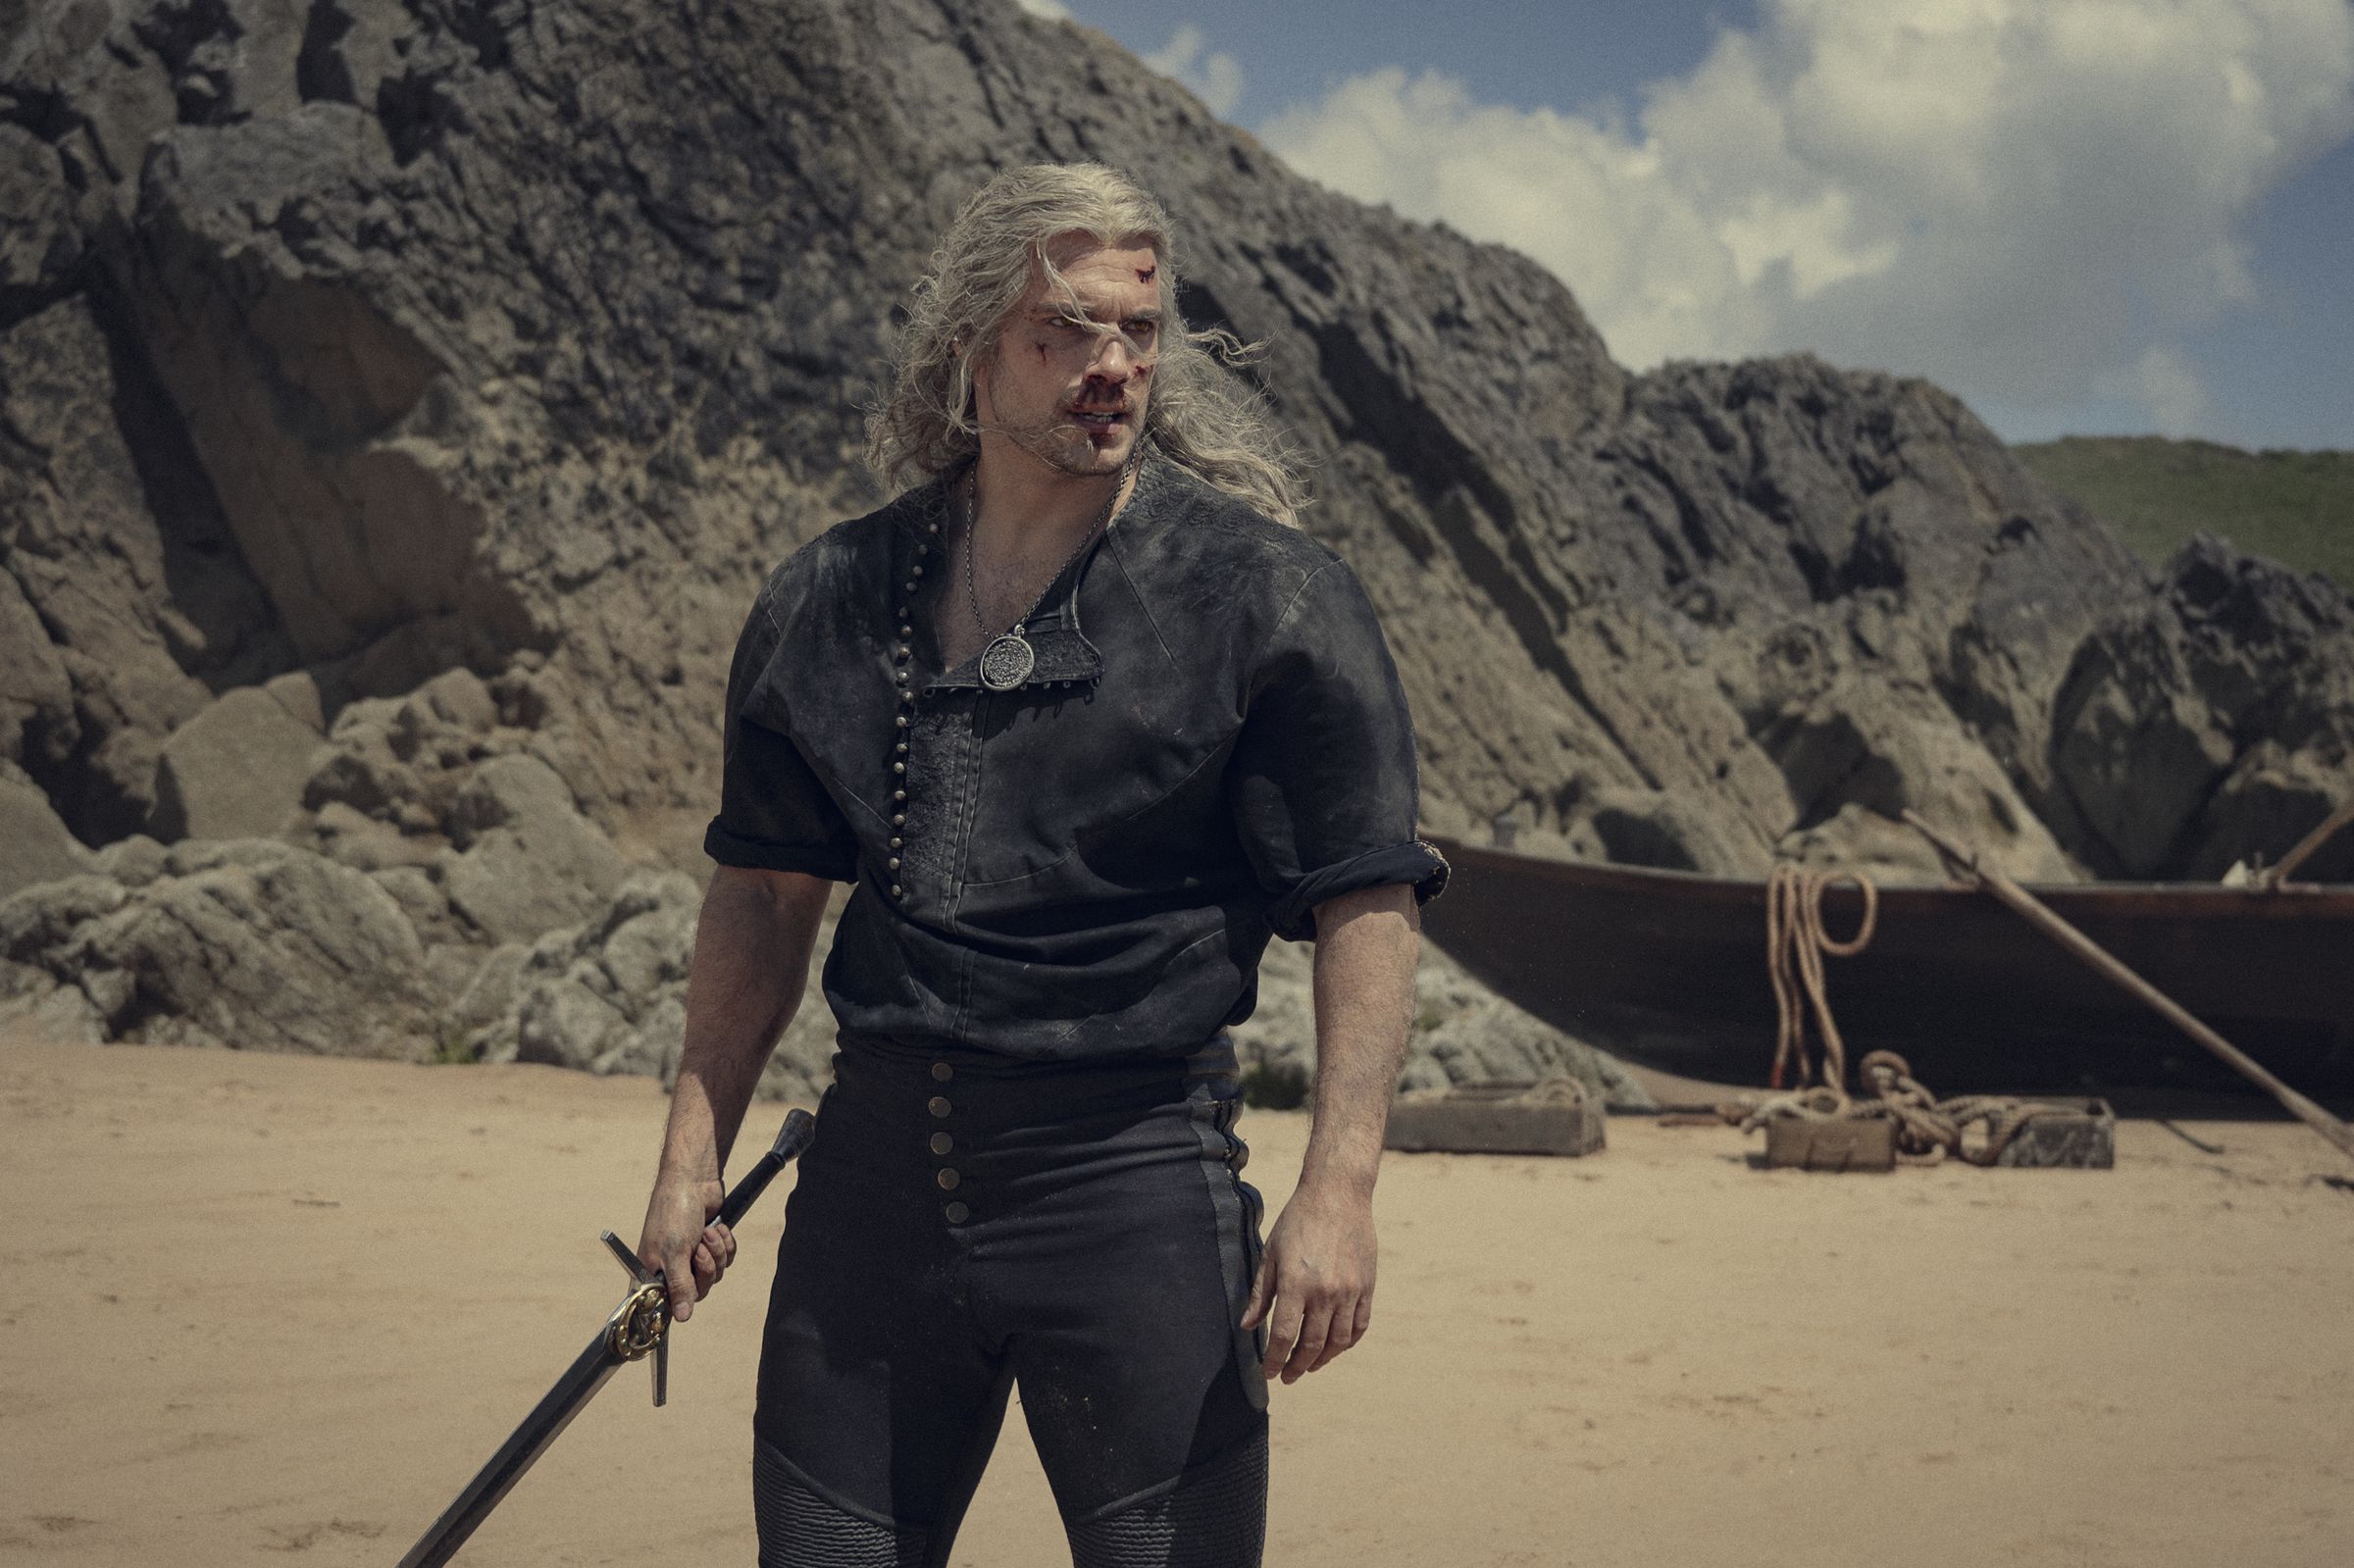 A photo of Henry Cavill in season 3 of The Witcher.